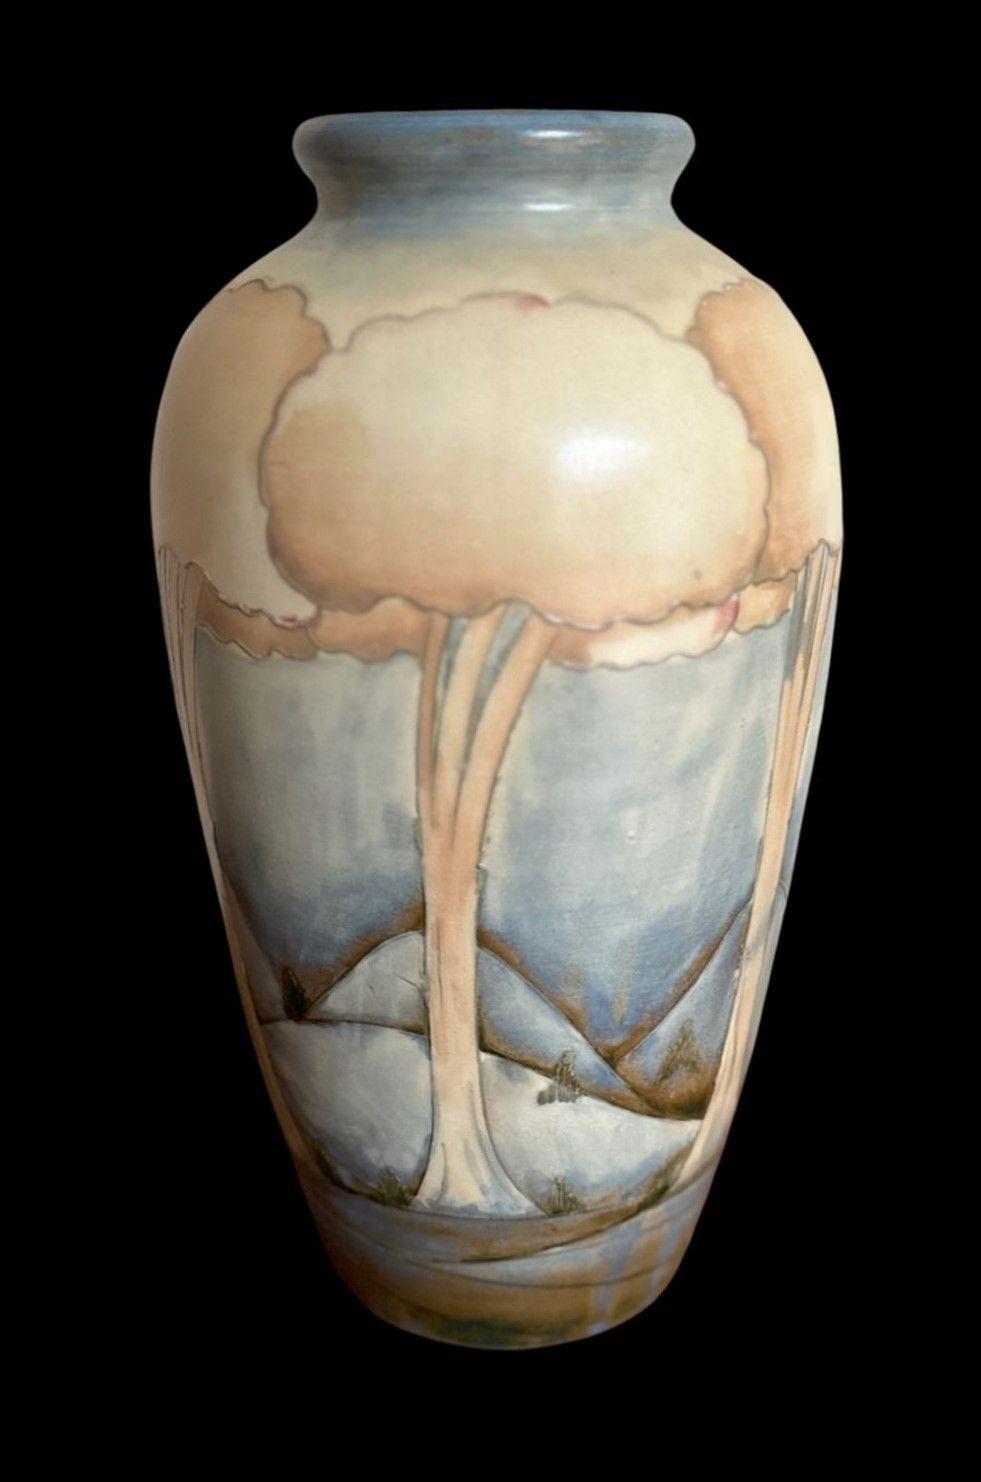 5363
Exceptional Example of a William Moorcroft Salt Glazed Landscape Vase, decorated in a pastel palate with an eggshell finish.
30cm high, 15cm wide
Circa 1928